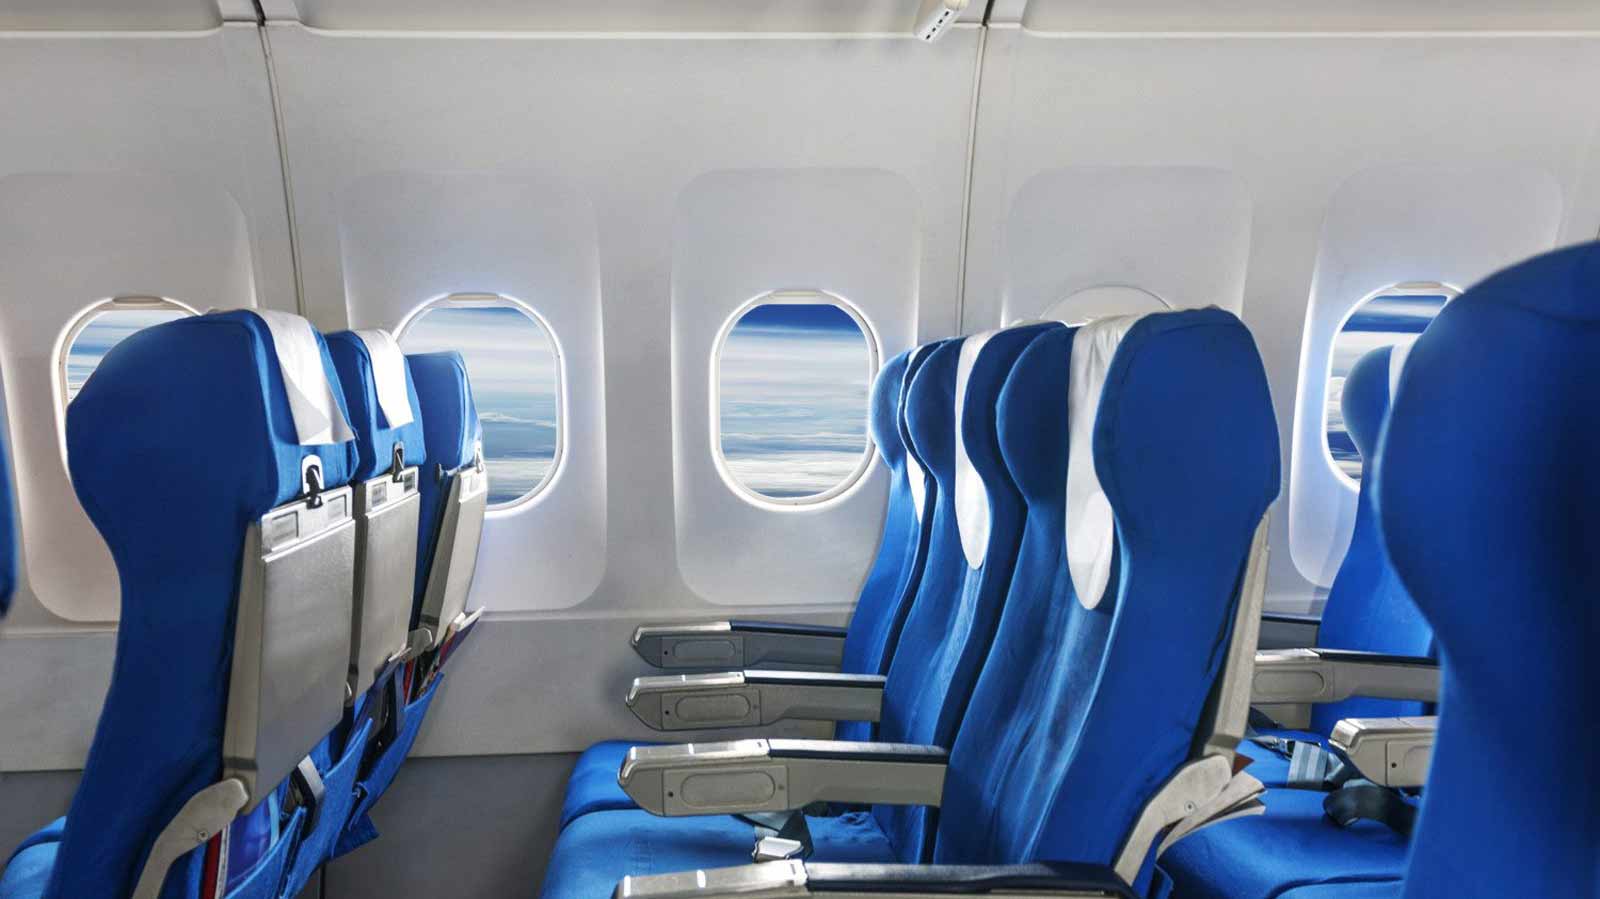 Plane Windows Never Line Up Perfectly With Your Seat: Here’s Why